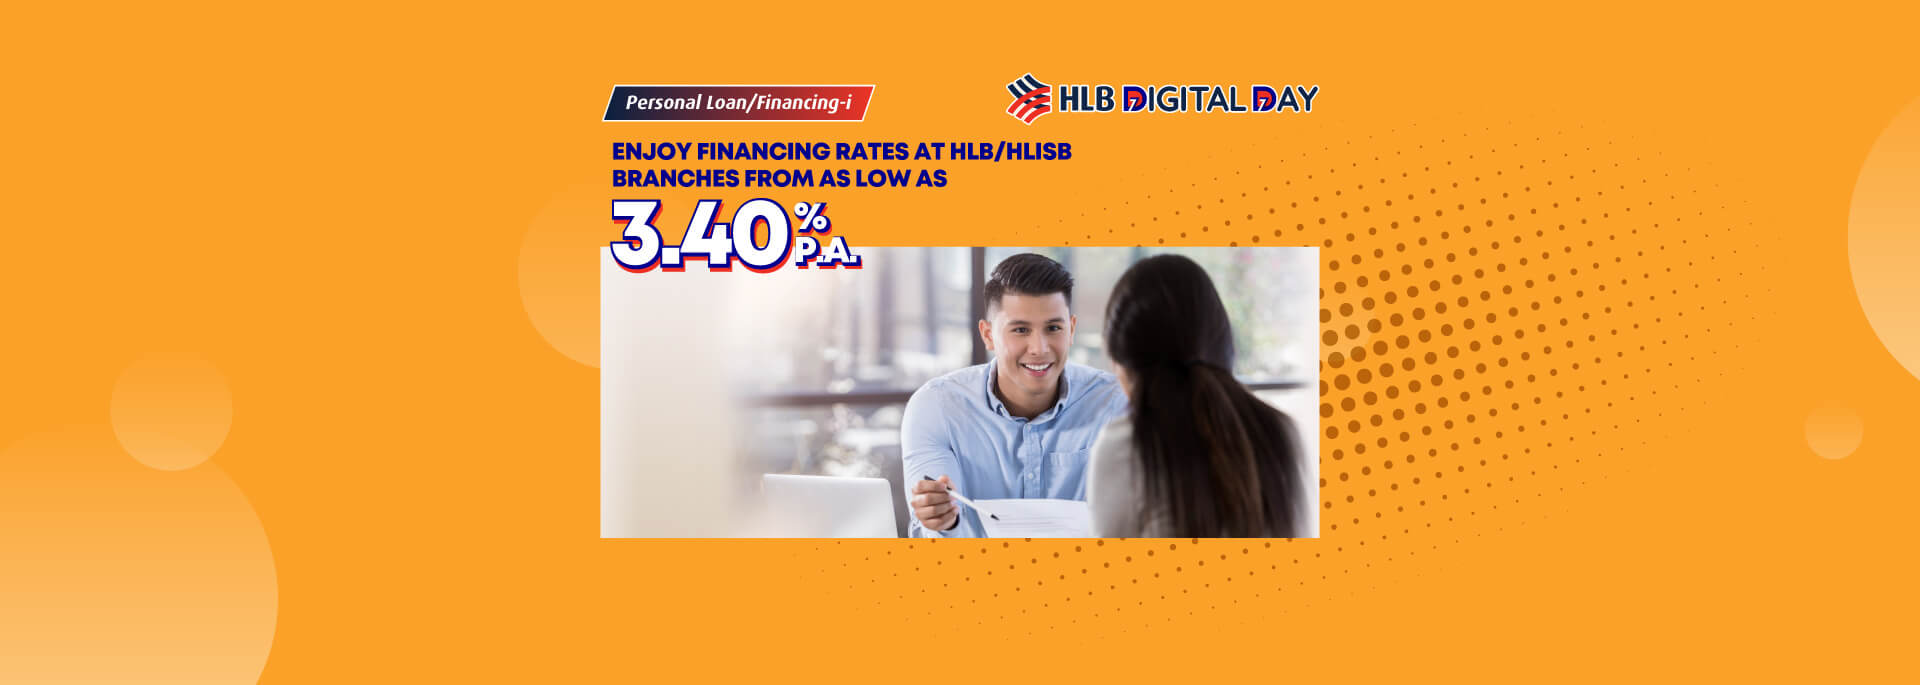 Enjoy financing rates at HLB/HLISB branches from as low as 3.40%p.a.